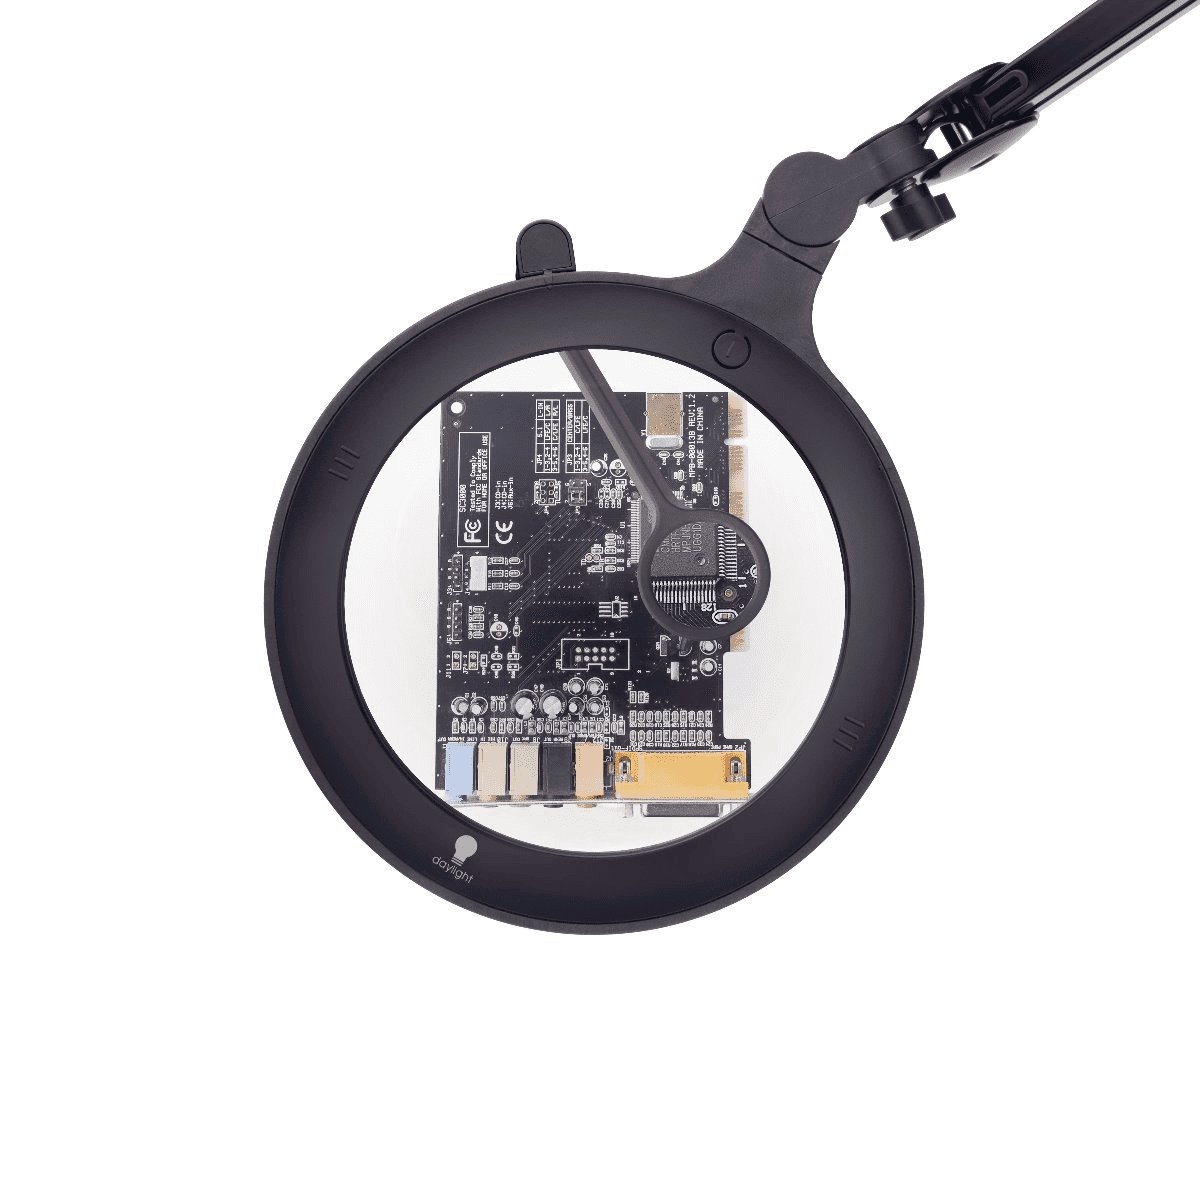 Daylight Omega 7 ESD Magnifier